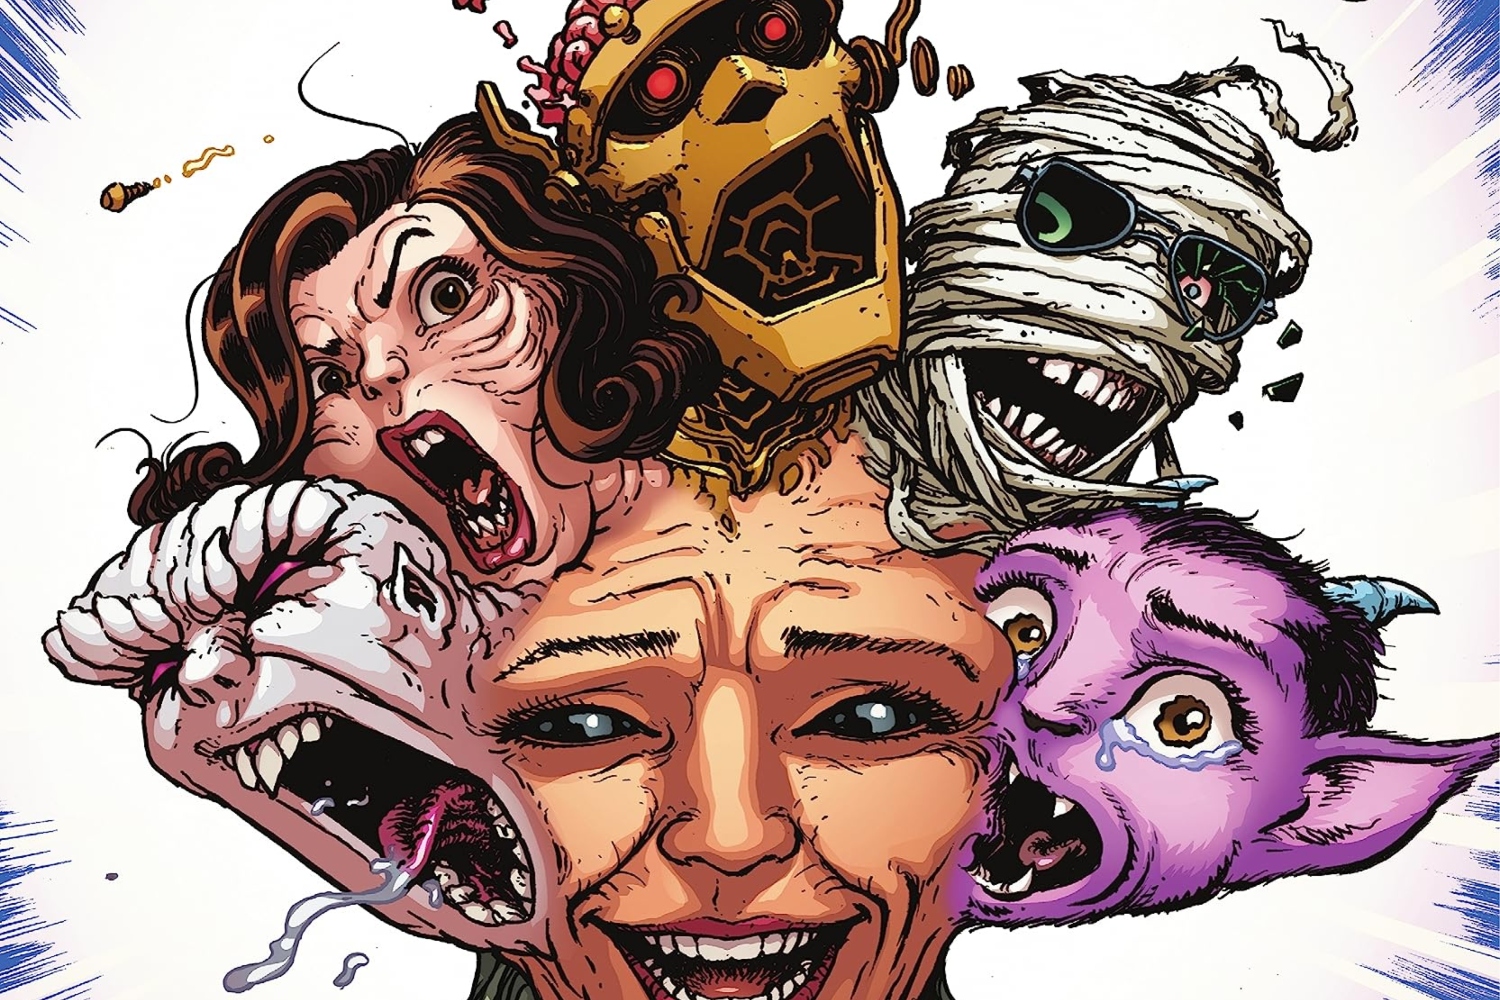 Dennis Culver analyzes 'Unstoppable Doom Patrol' and its final four issues